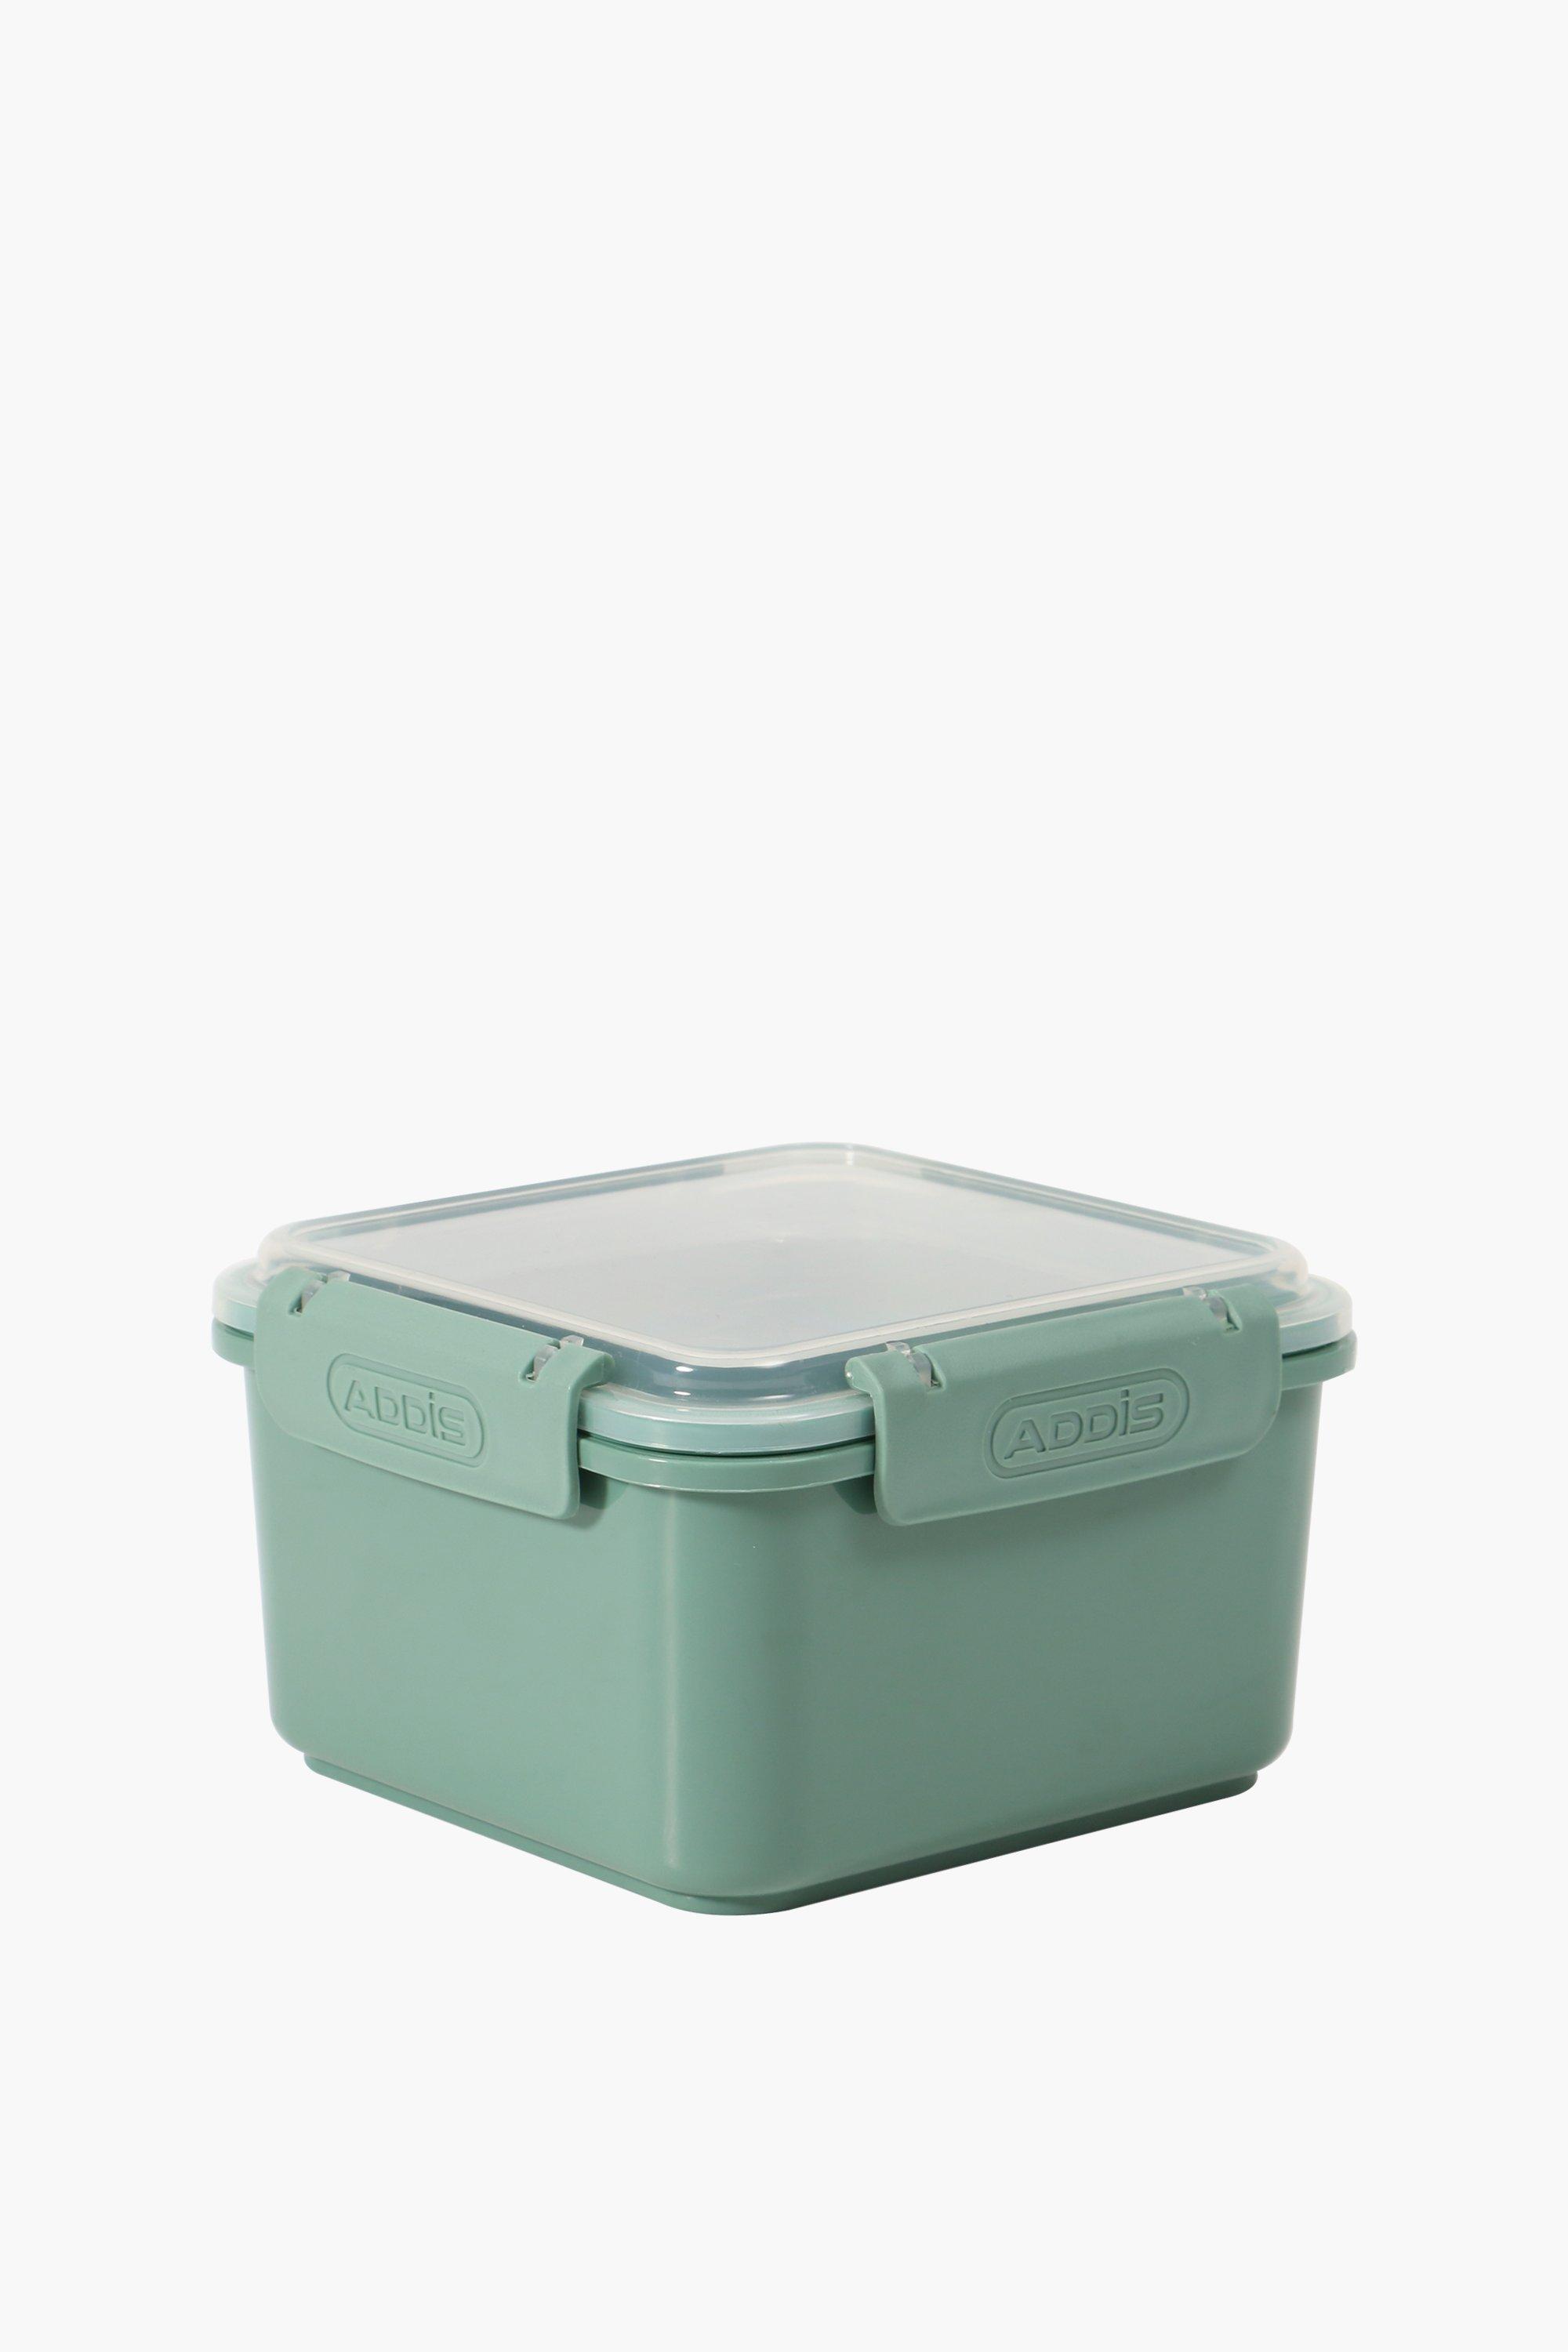 Stanley Adventure eCycle Nesting Food Containers Green